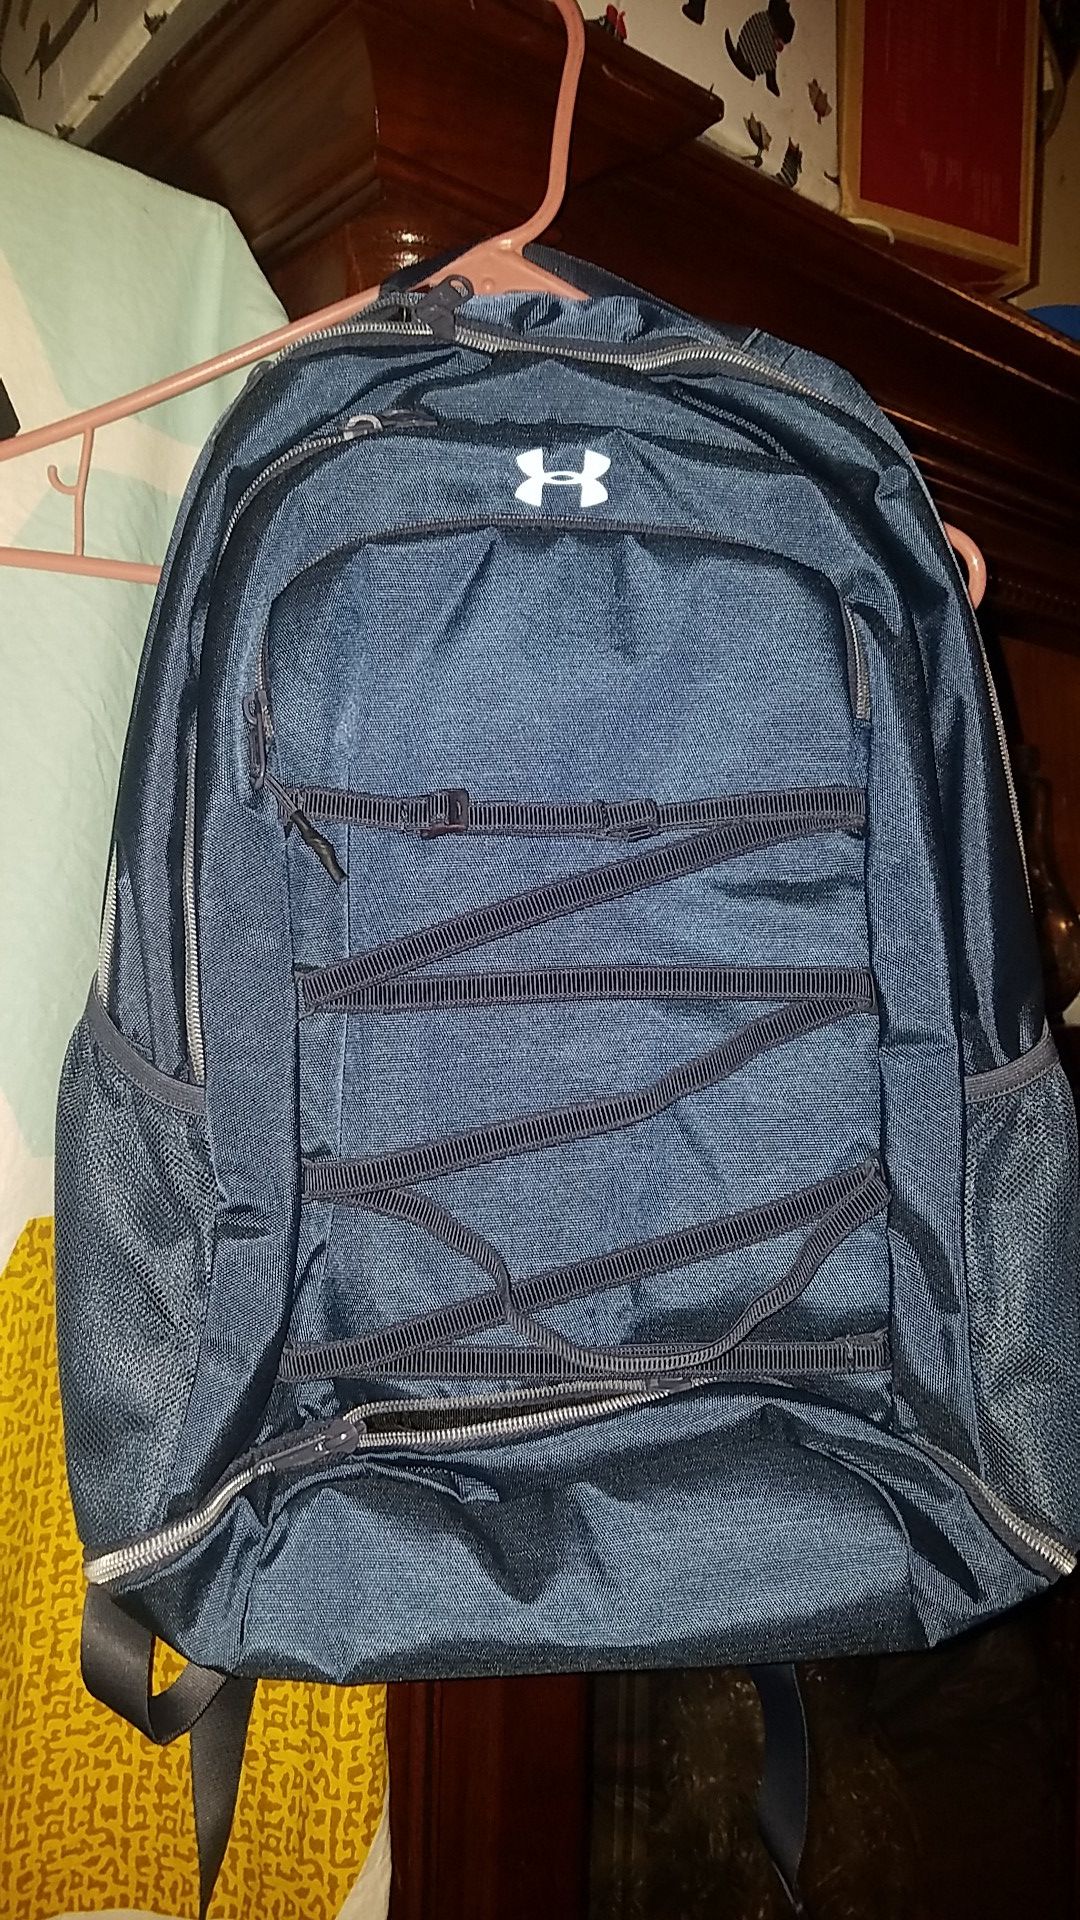 New backpack under armor Woman's